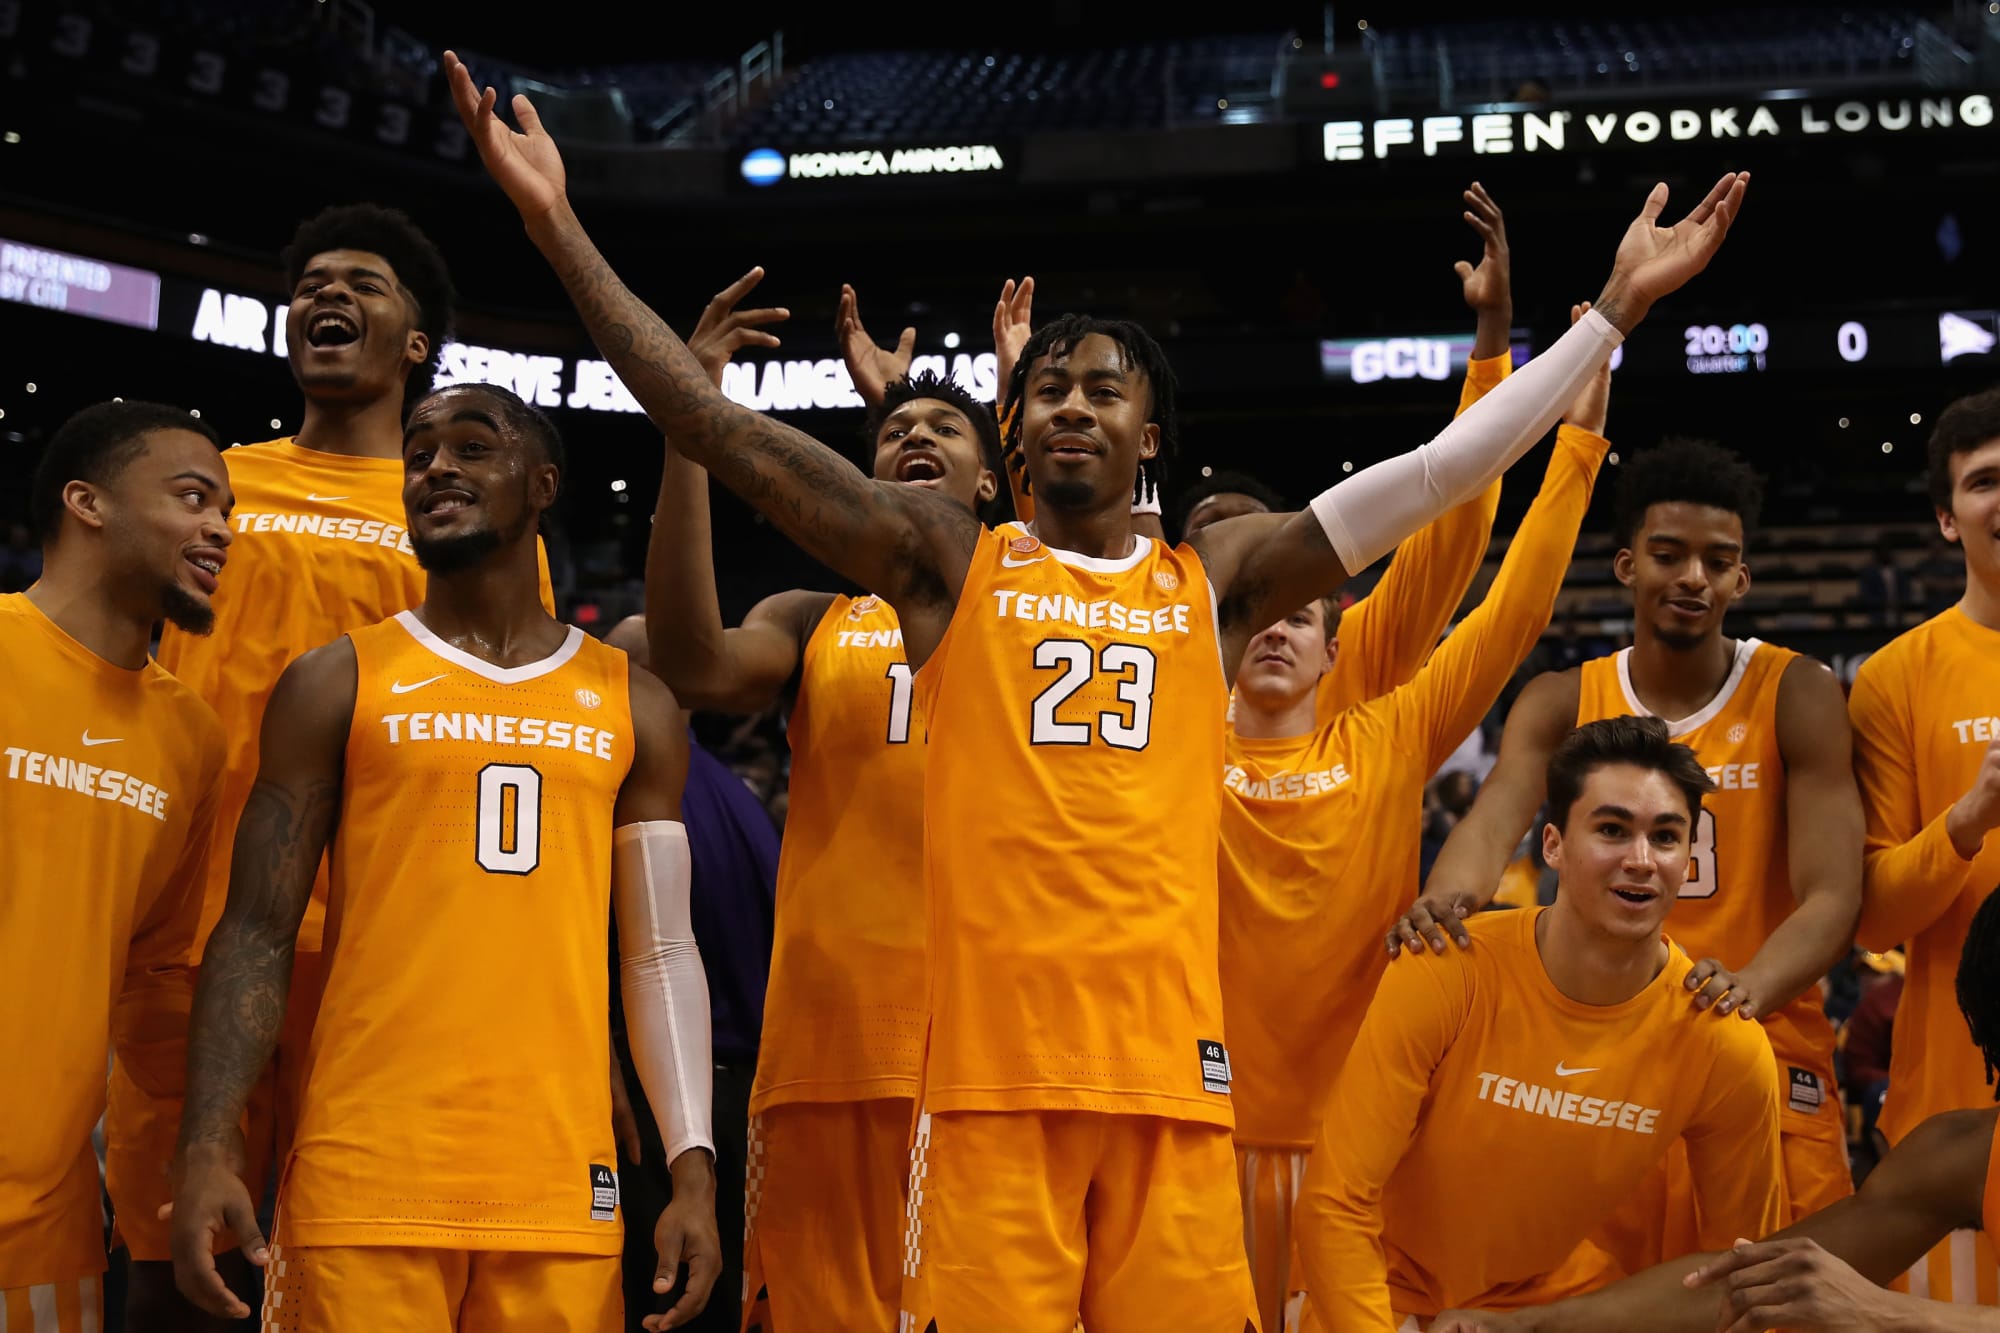 Tennessee basketball Vols make history with No. 1 ranking in both polls